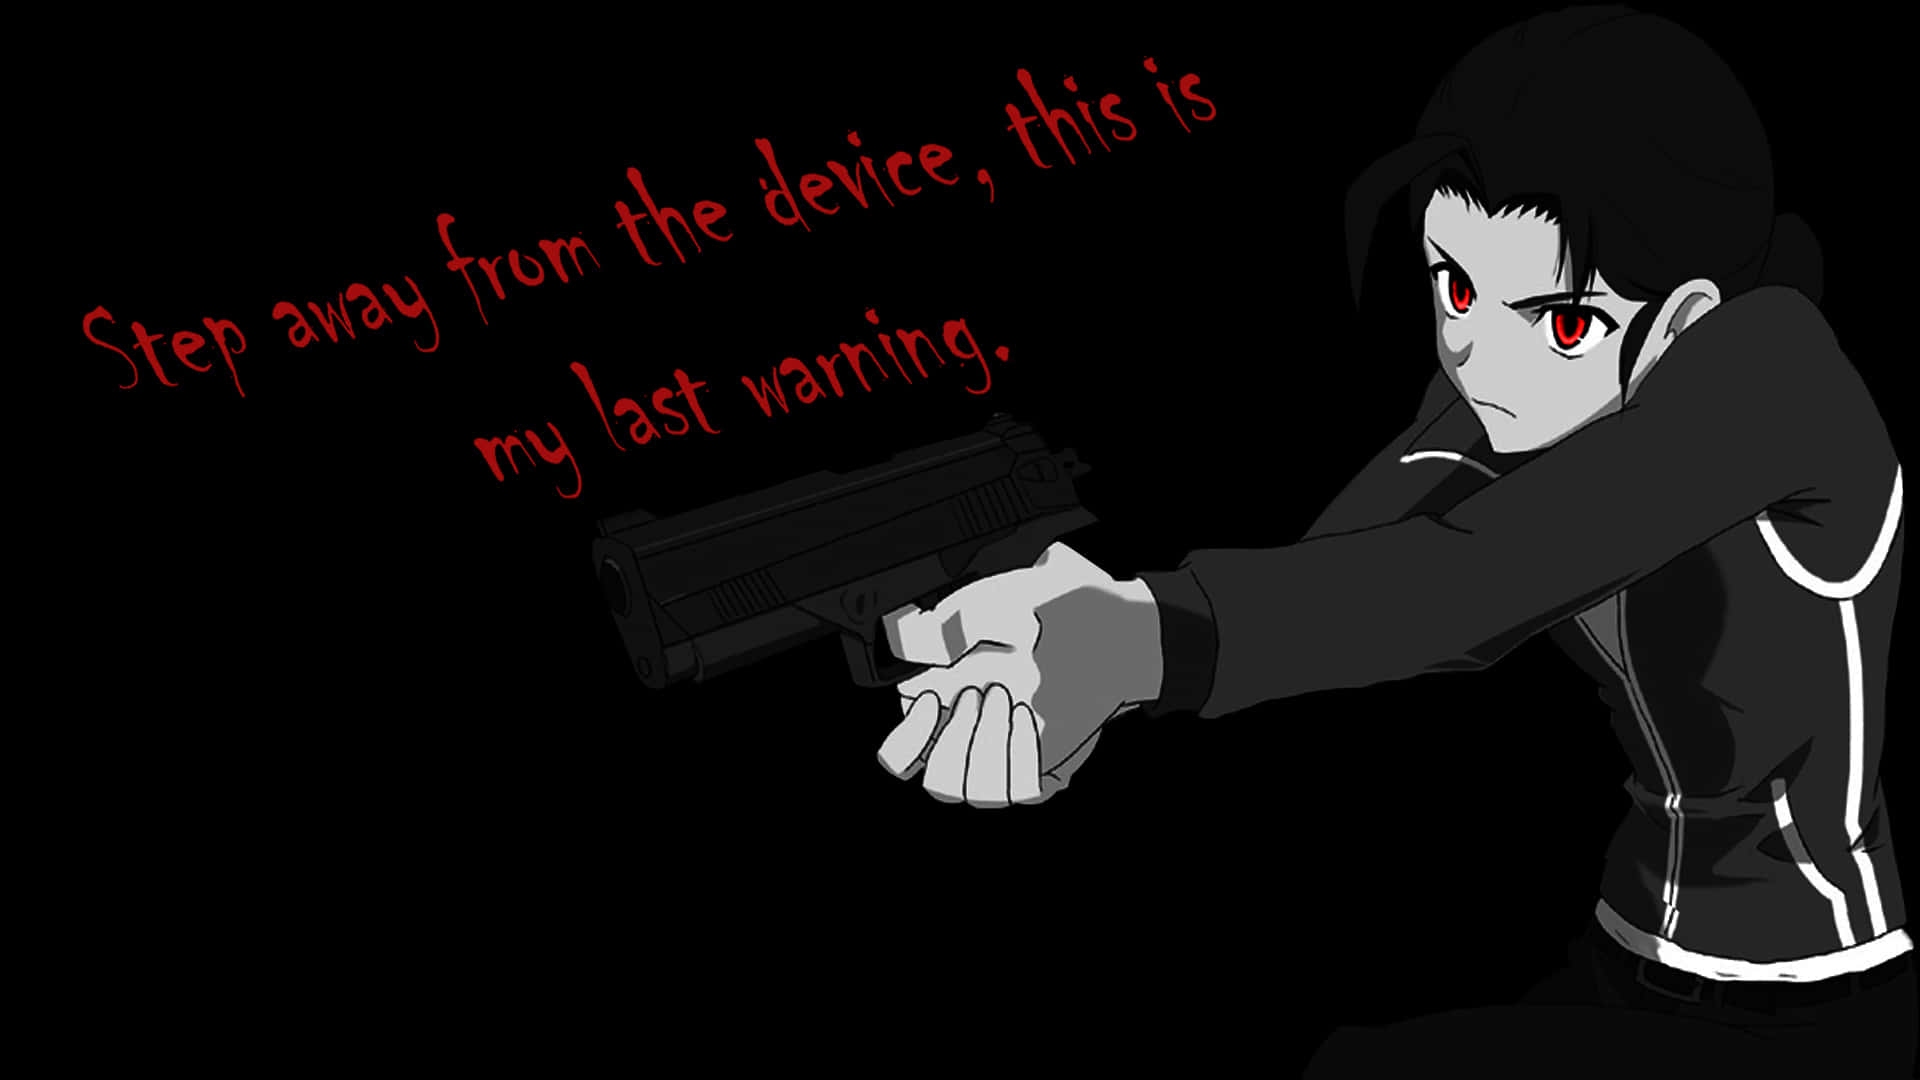 A Girl Holding A Gun With The Words Step Away From The Devils This Is My Last Naing Wallpaper